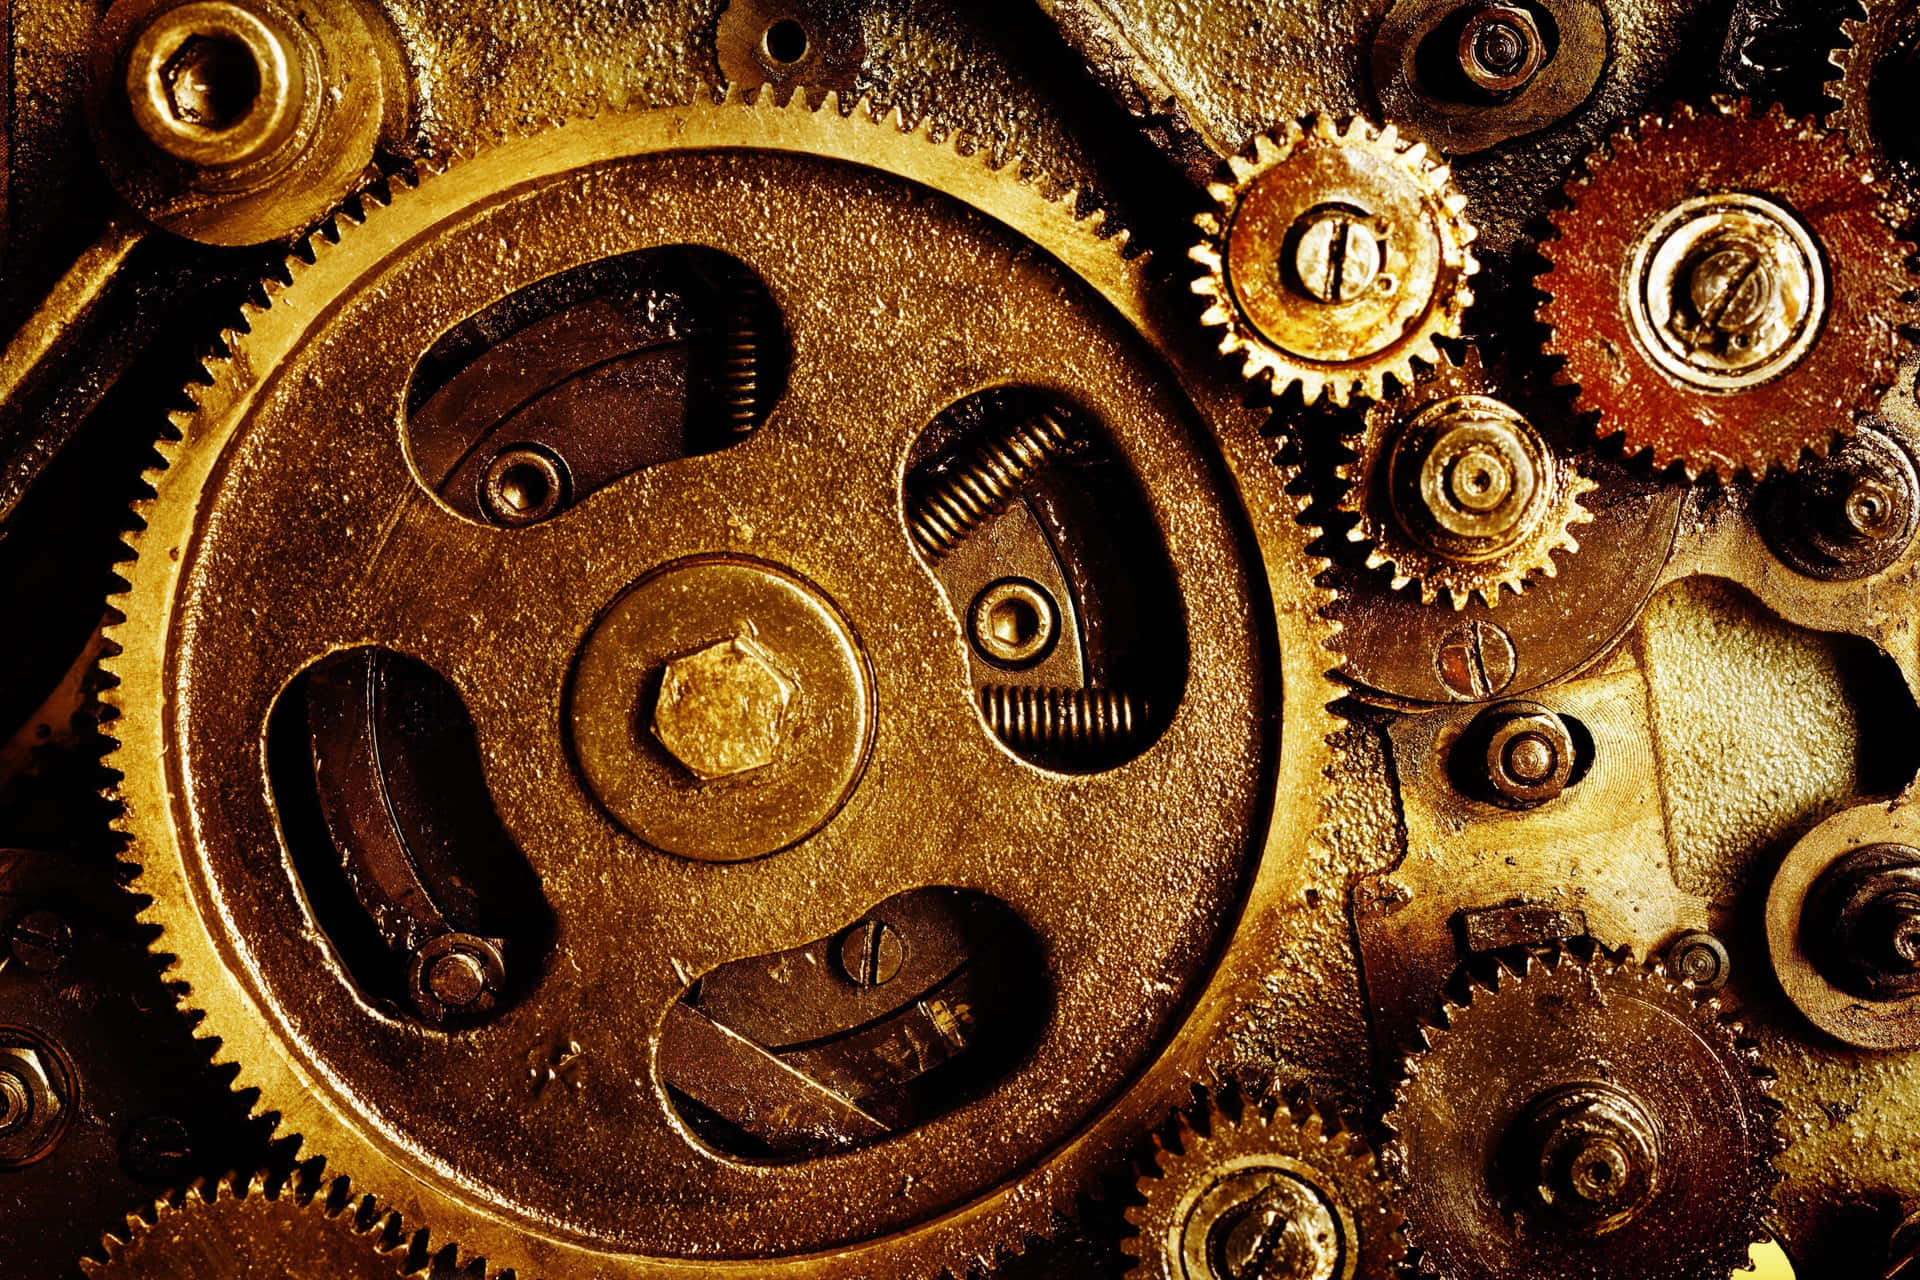 Vintage Mechanical Gearsand Cogs Background